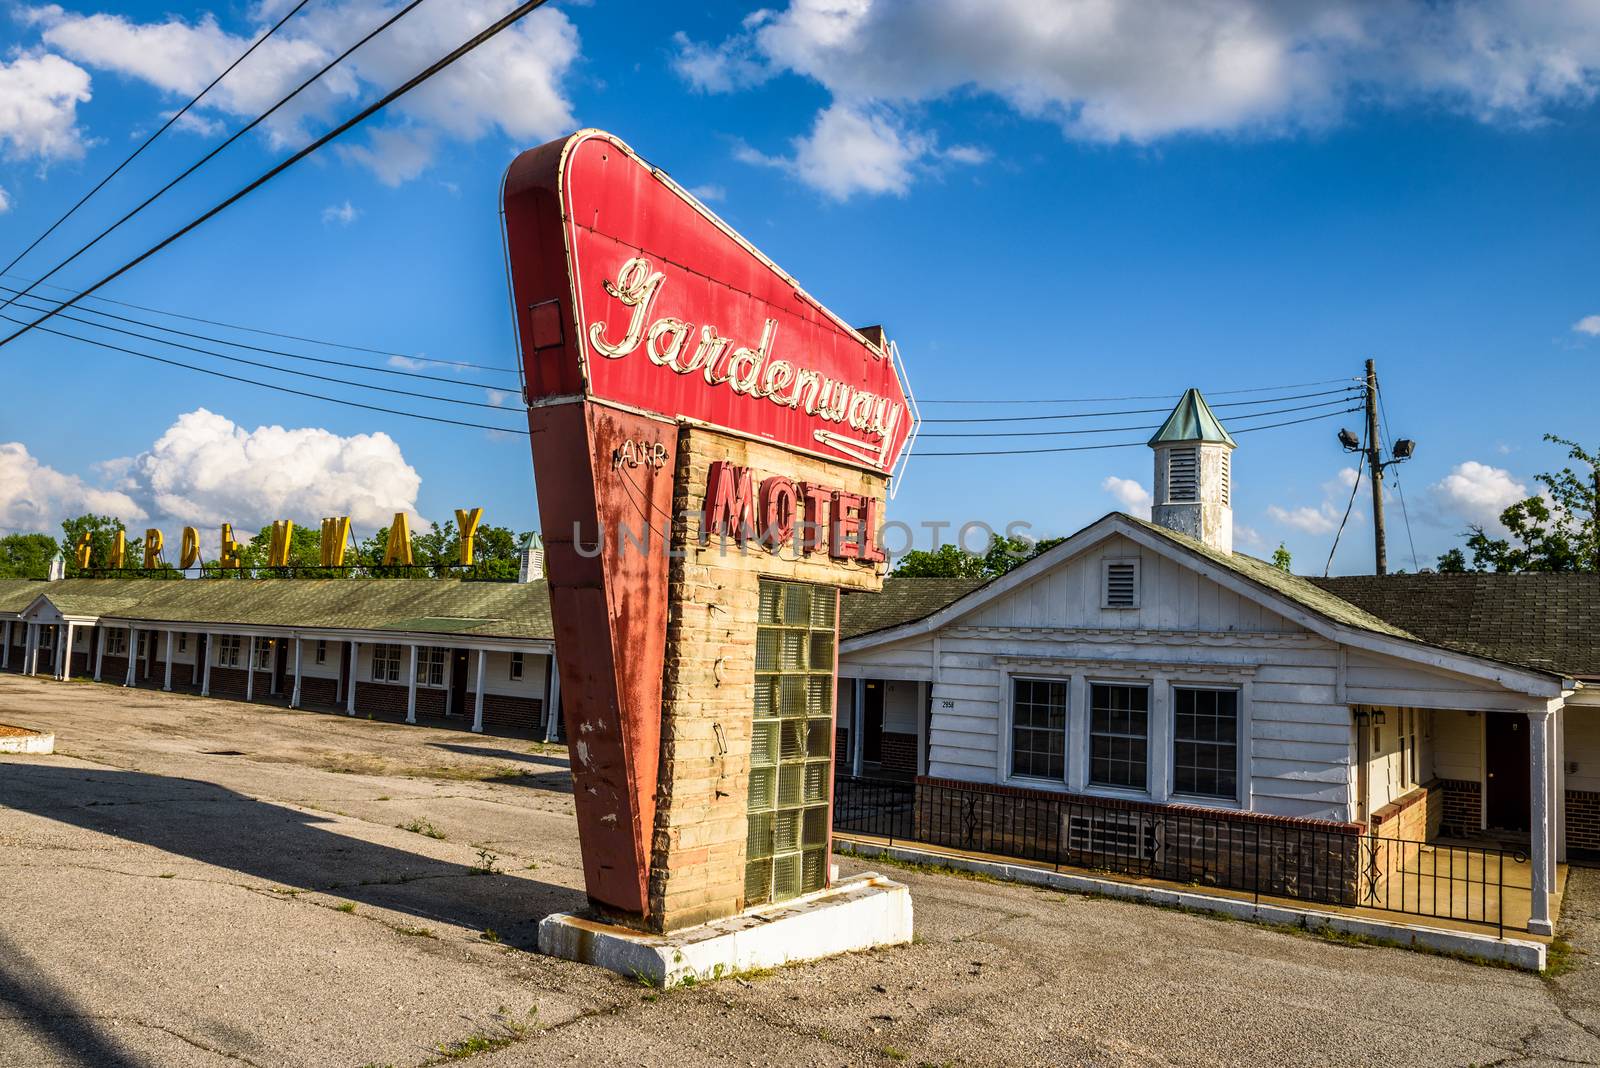 VILLA RIDGE, MISSOURI, USA - MAY 11, 2016 : Abandoned Gardenway Motel and vintage neon sign on historic Route 66 in Missouri. The motel was built in 1945 and closed in 2014.